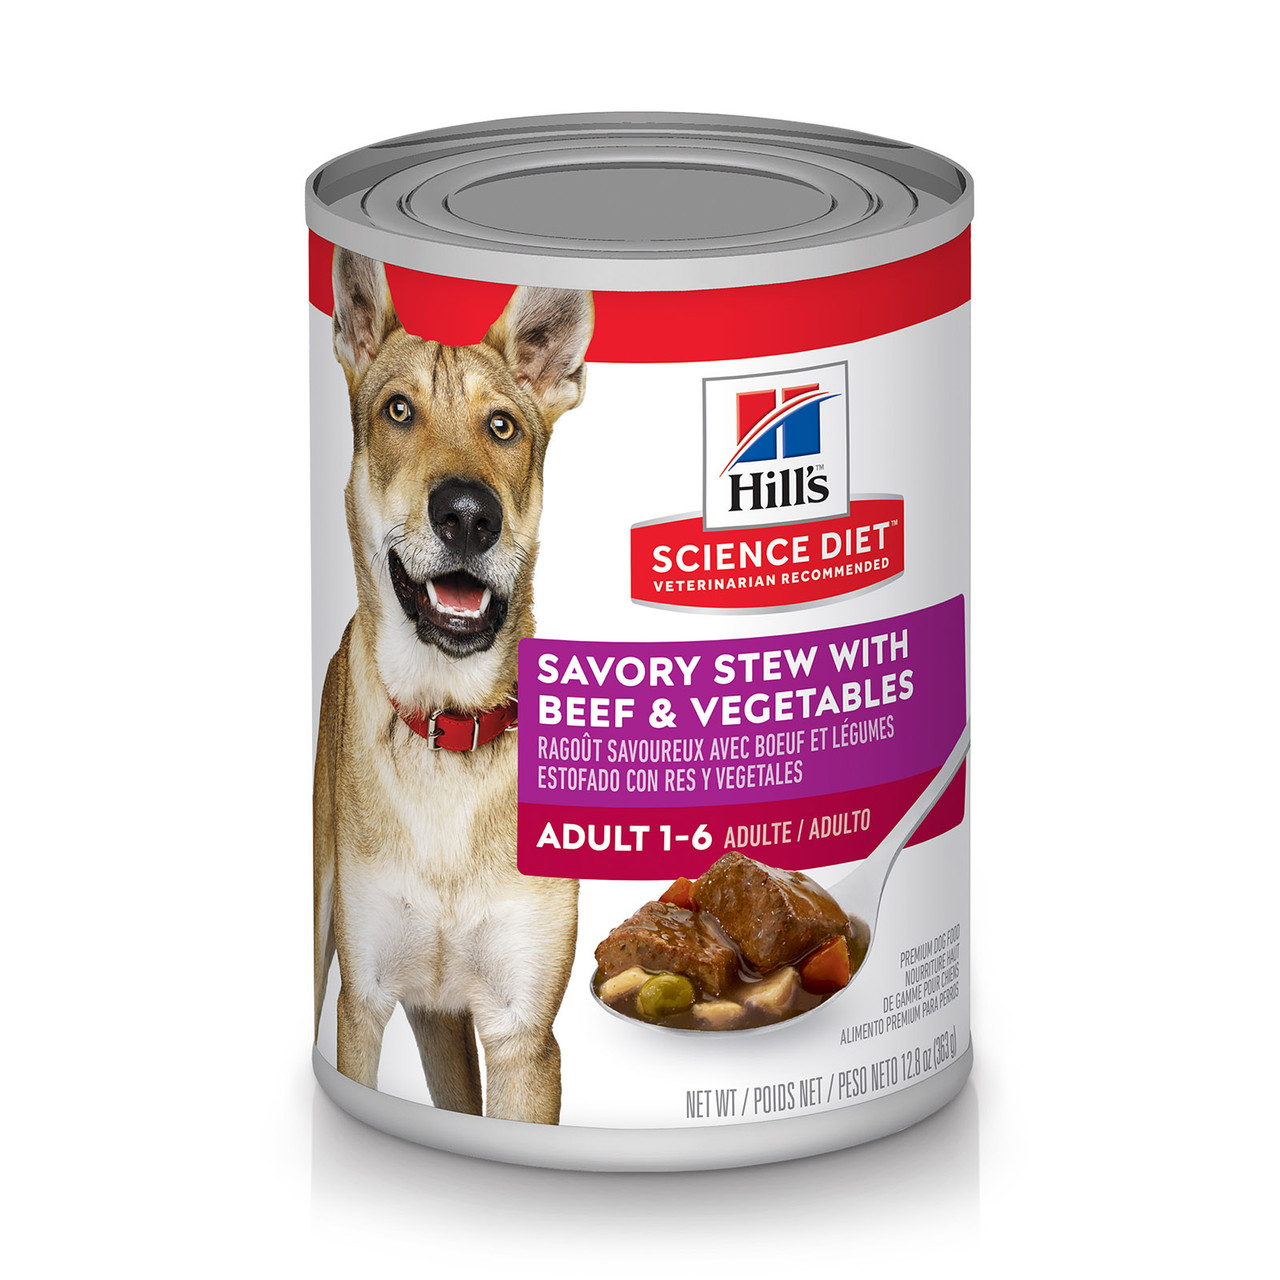 Hill's Science Diet Adult Savory Stew With Beef & Vegetables Wet Dog Food (12 x 363g cans)